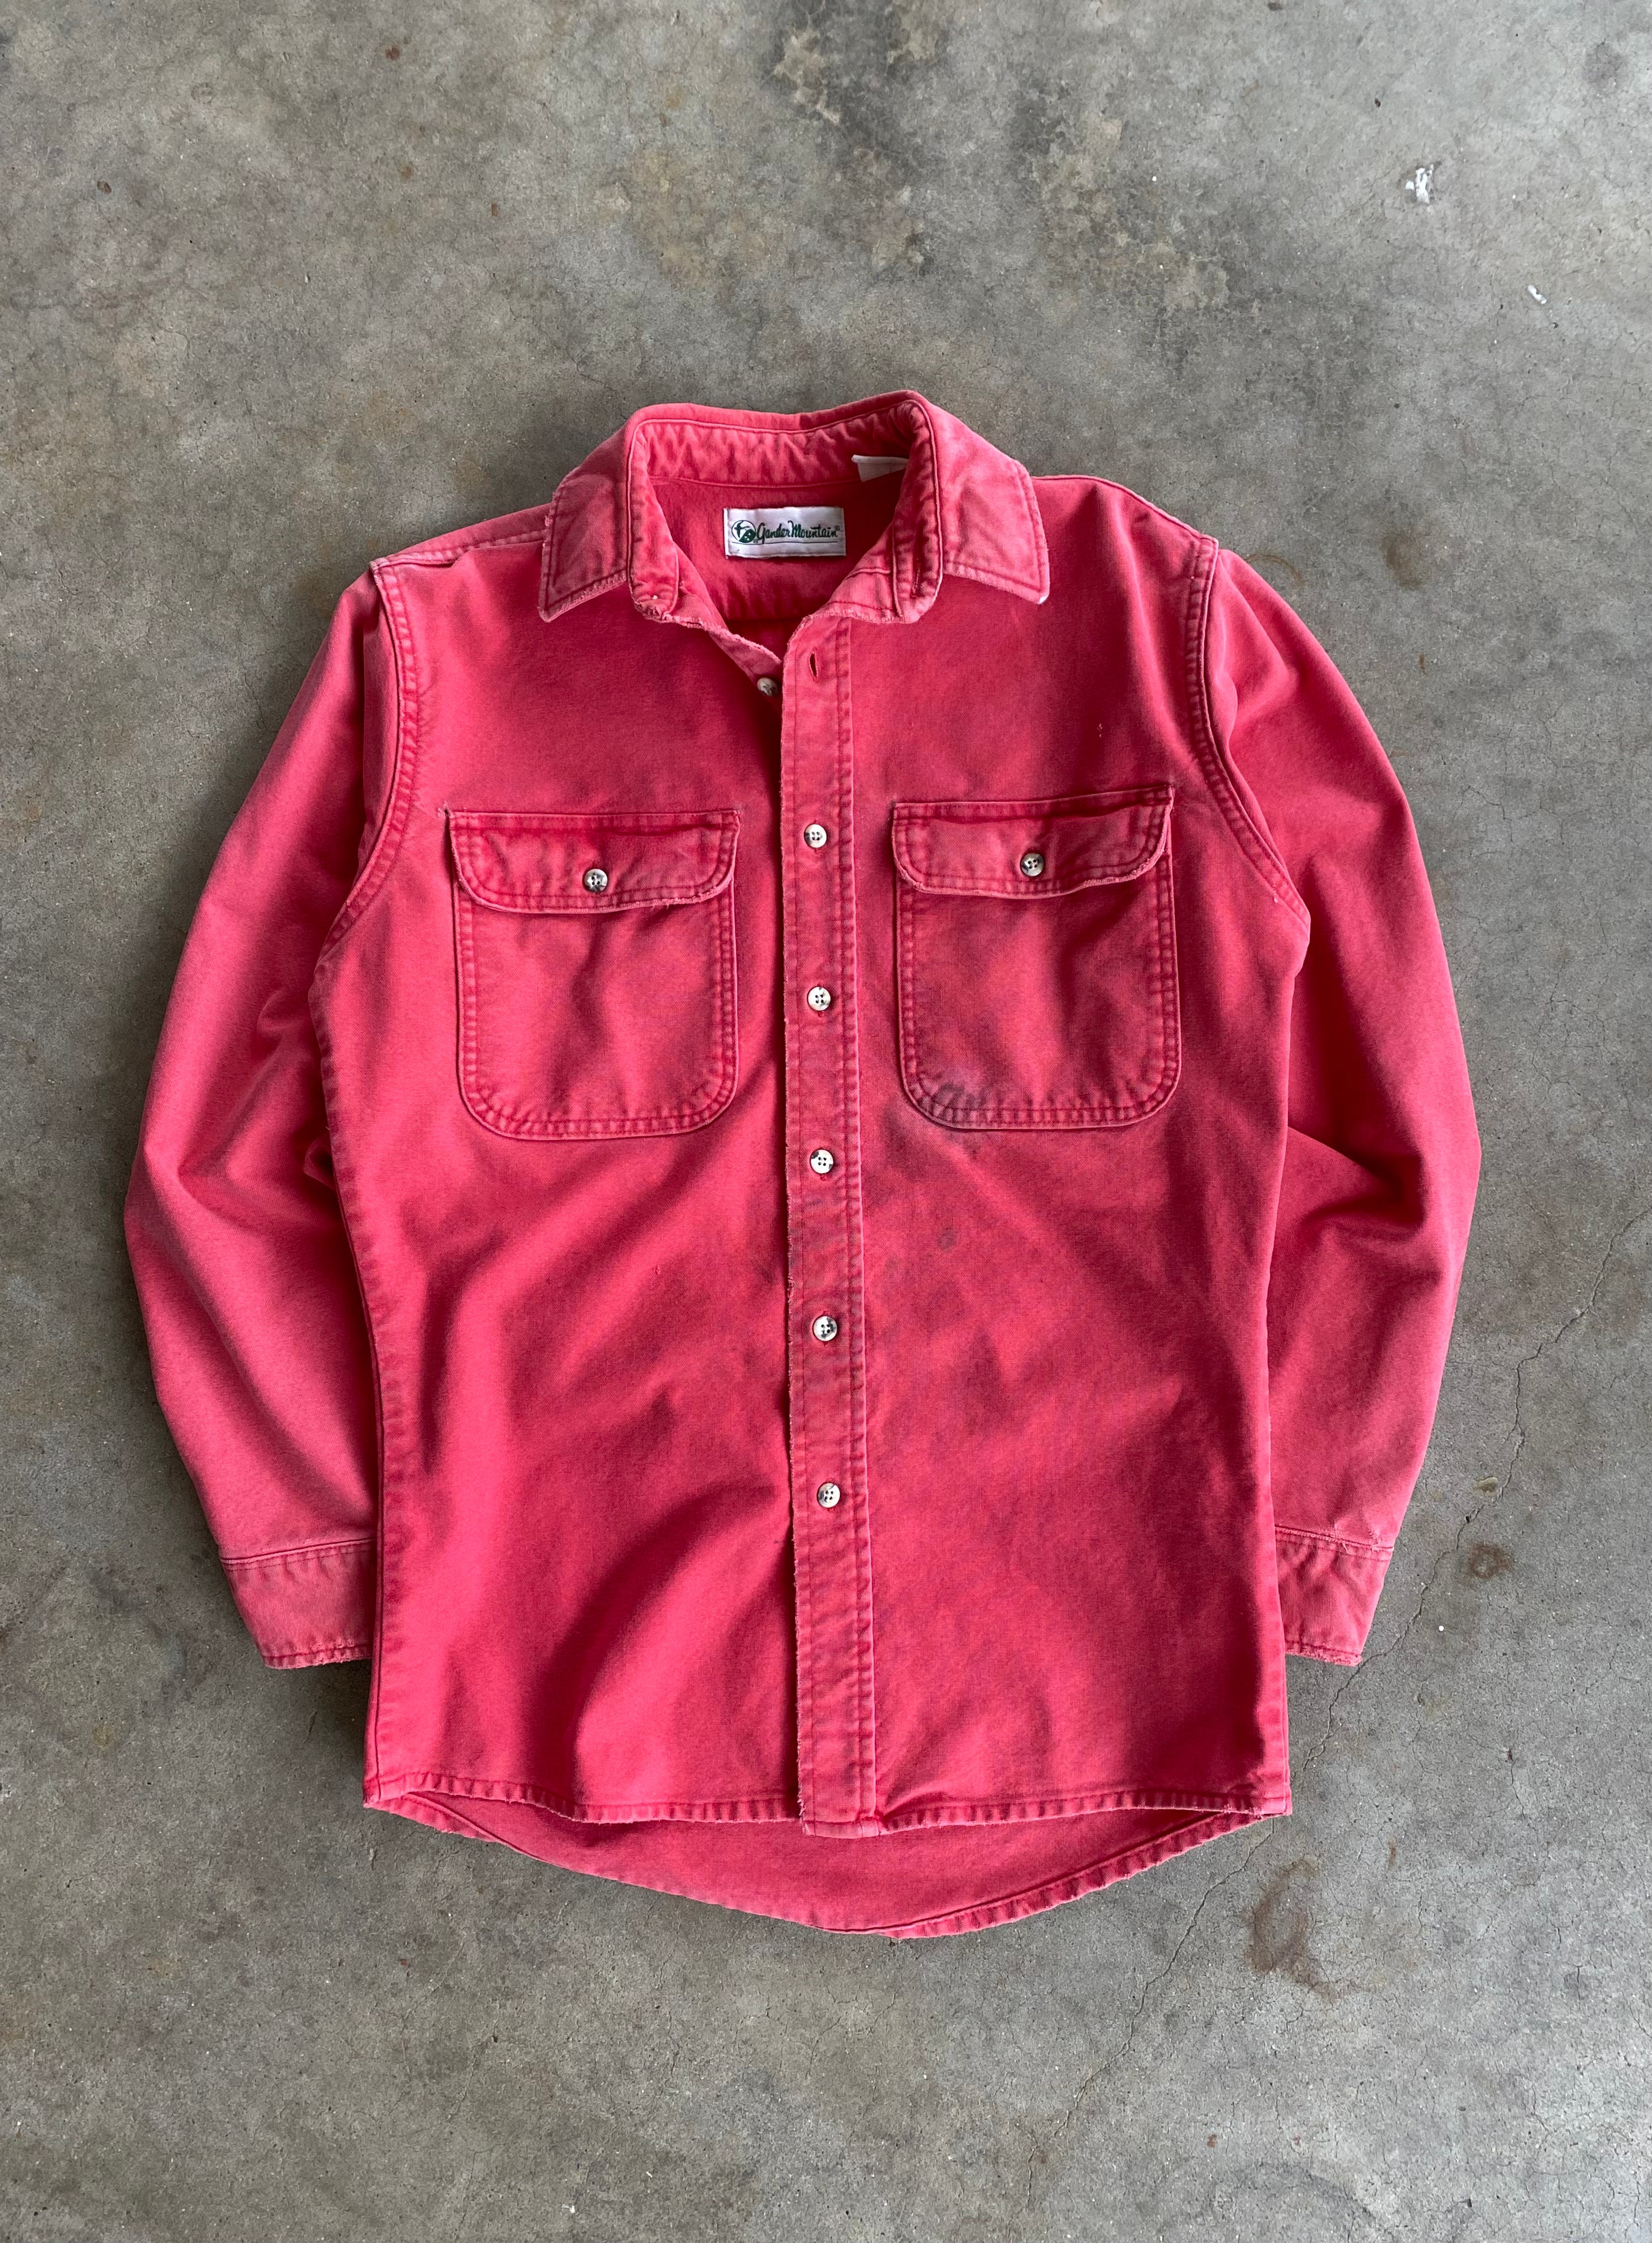 Vintage Gander Mountain Distressed/Faded Red Button Up